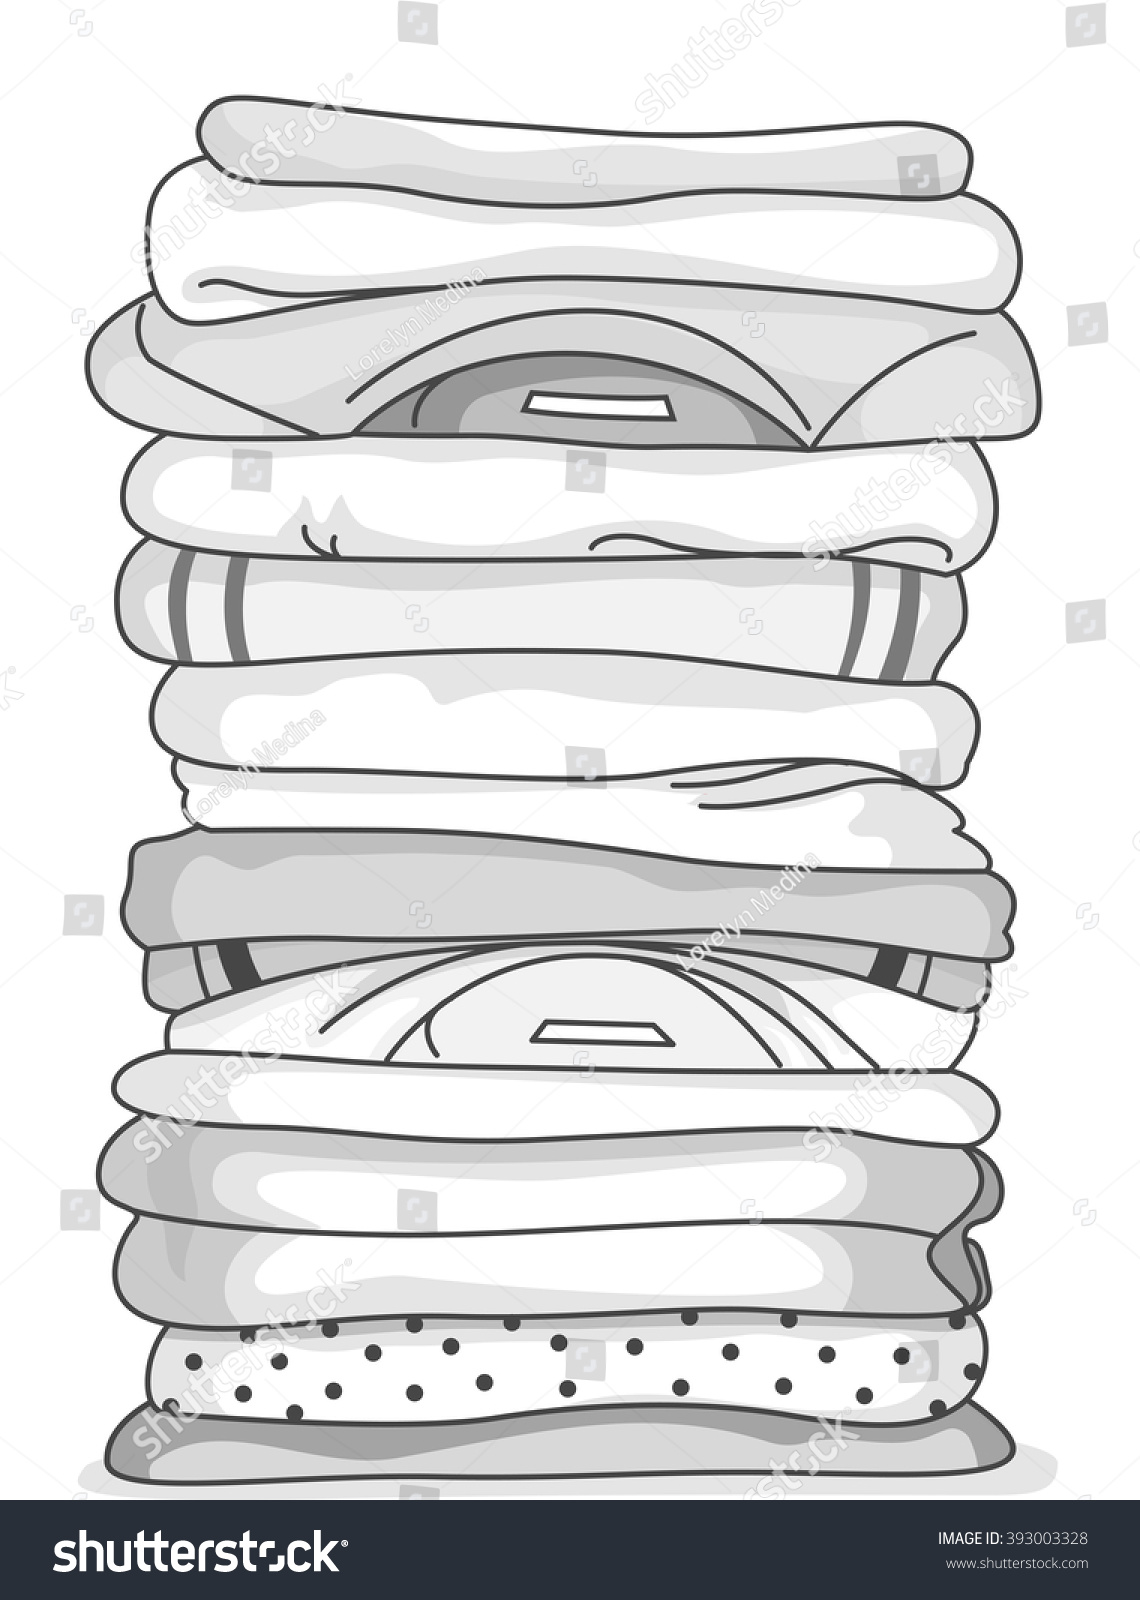 free black and white clip art clothing - photo #38